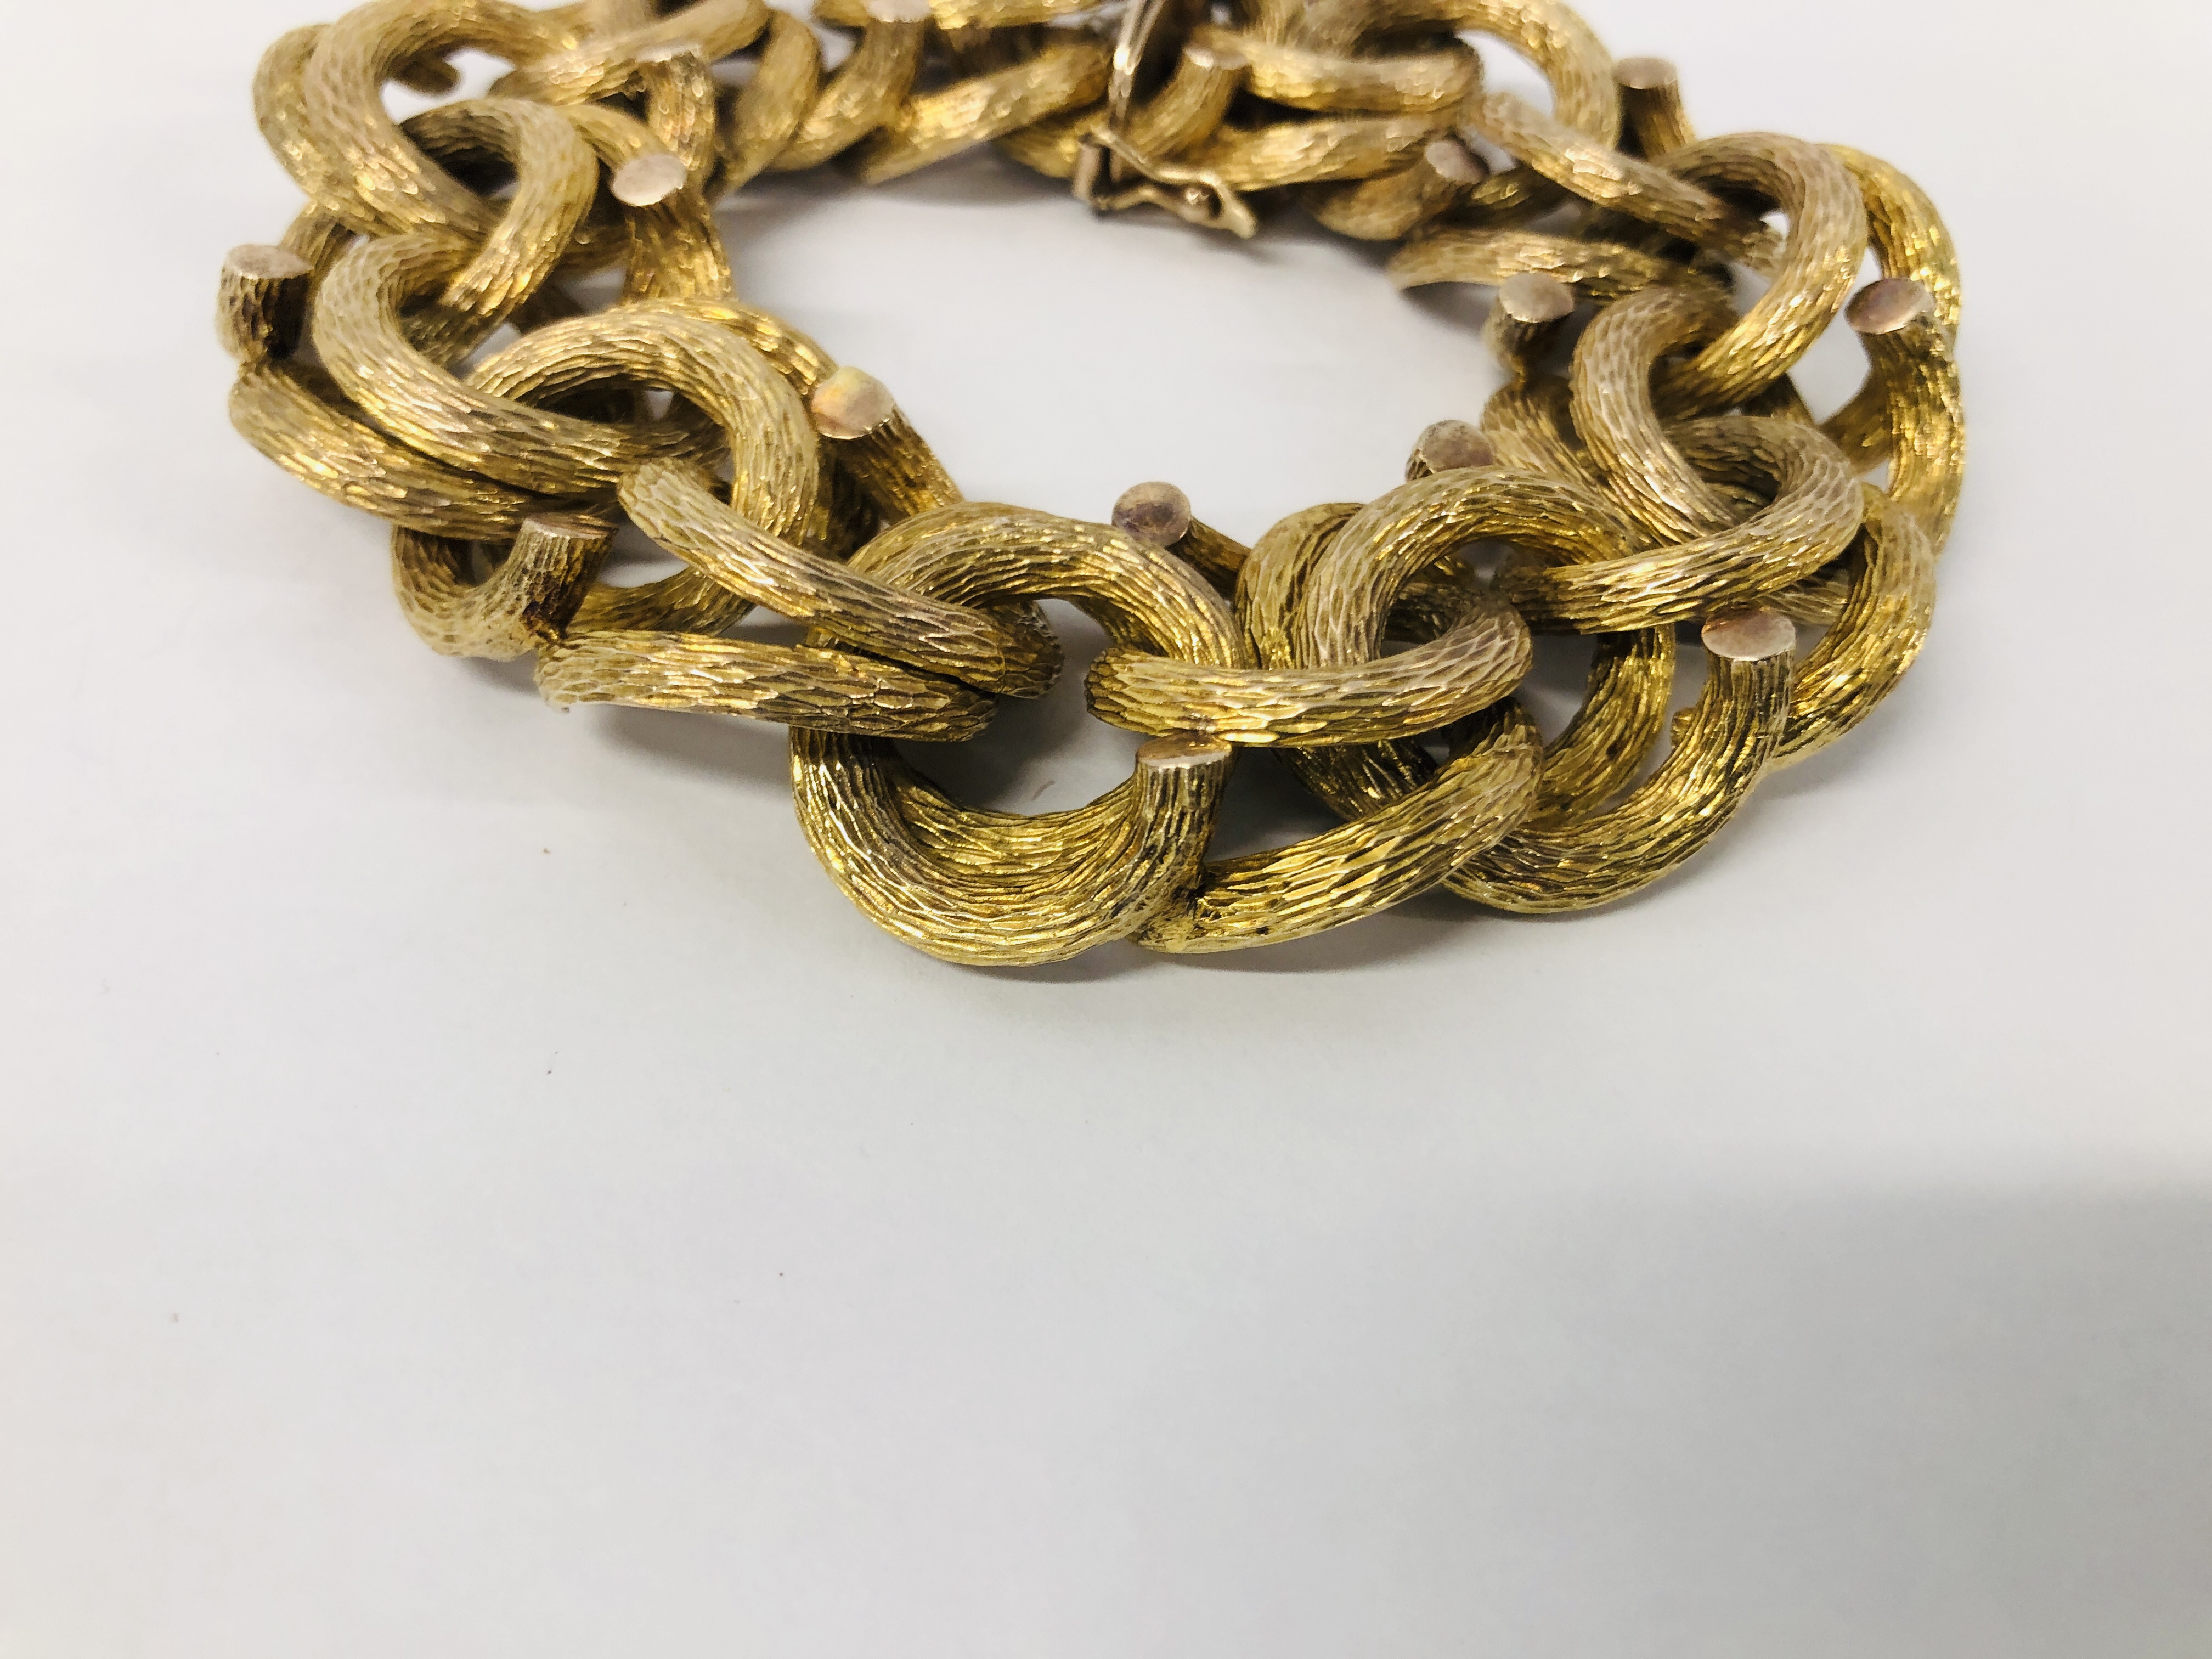 AN IMPRESSIVE 9CT. GOLD HEAVY BRACELET OF INTERWOVEN DESIGN, WITH SAFETY CHAIN. - Image 2 of 11